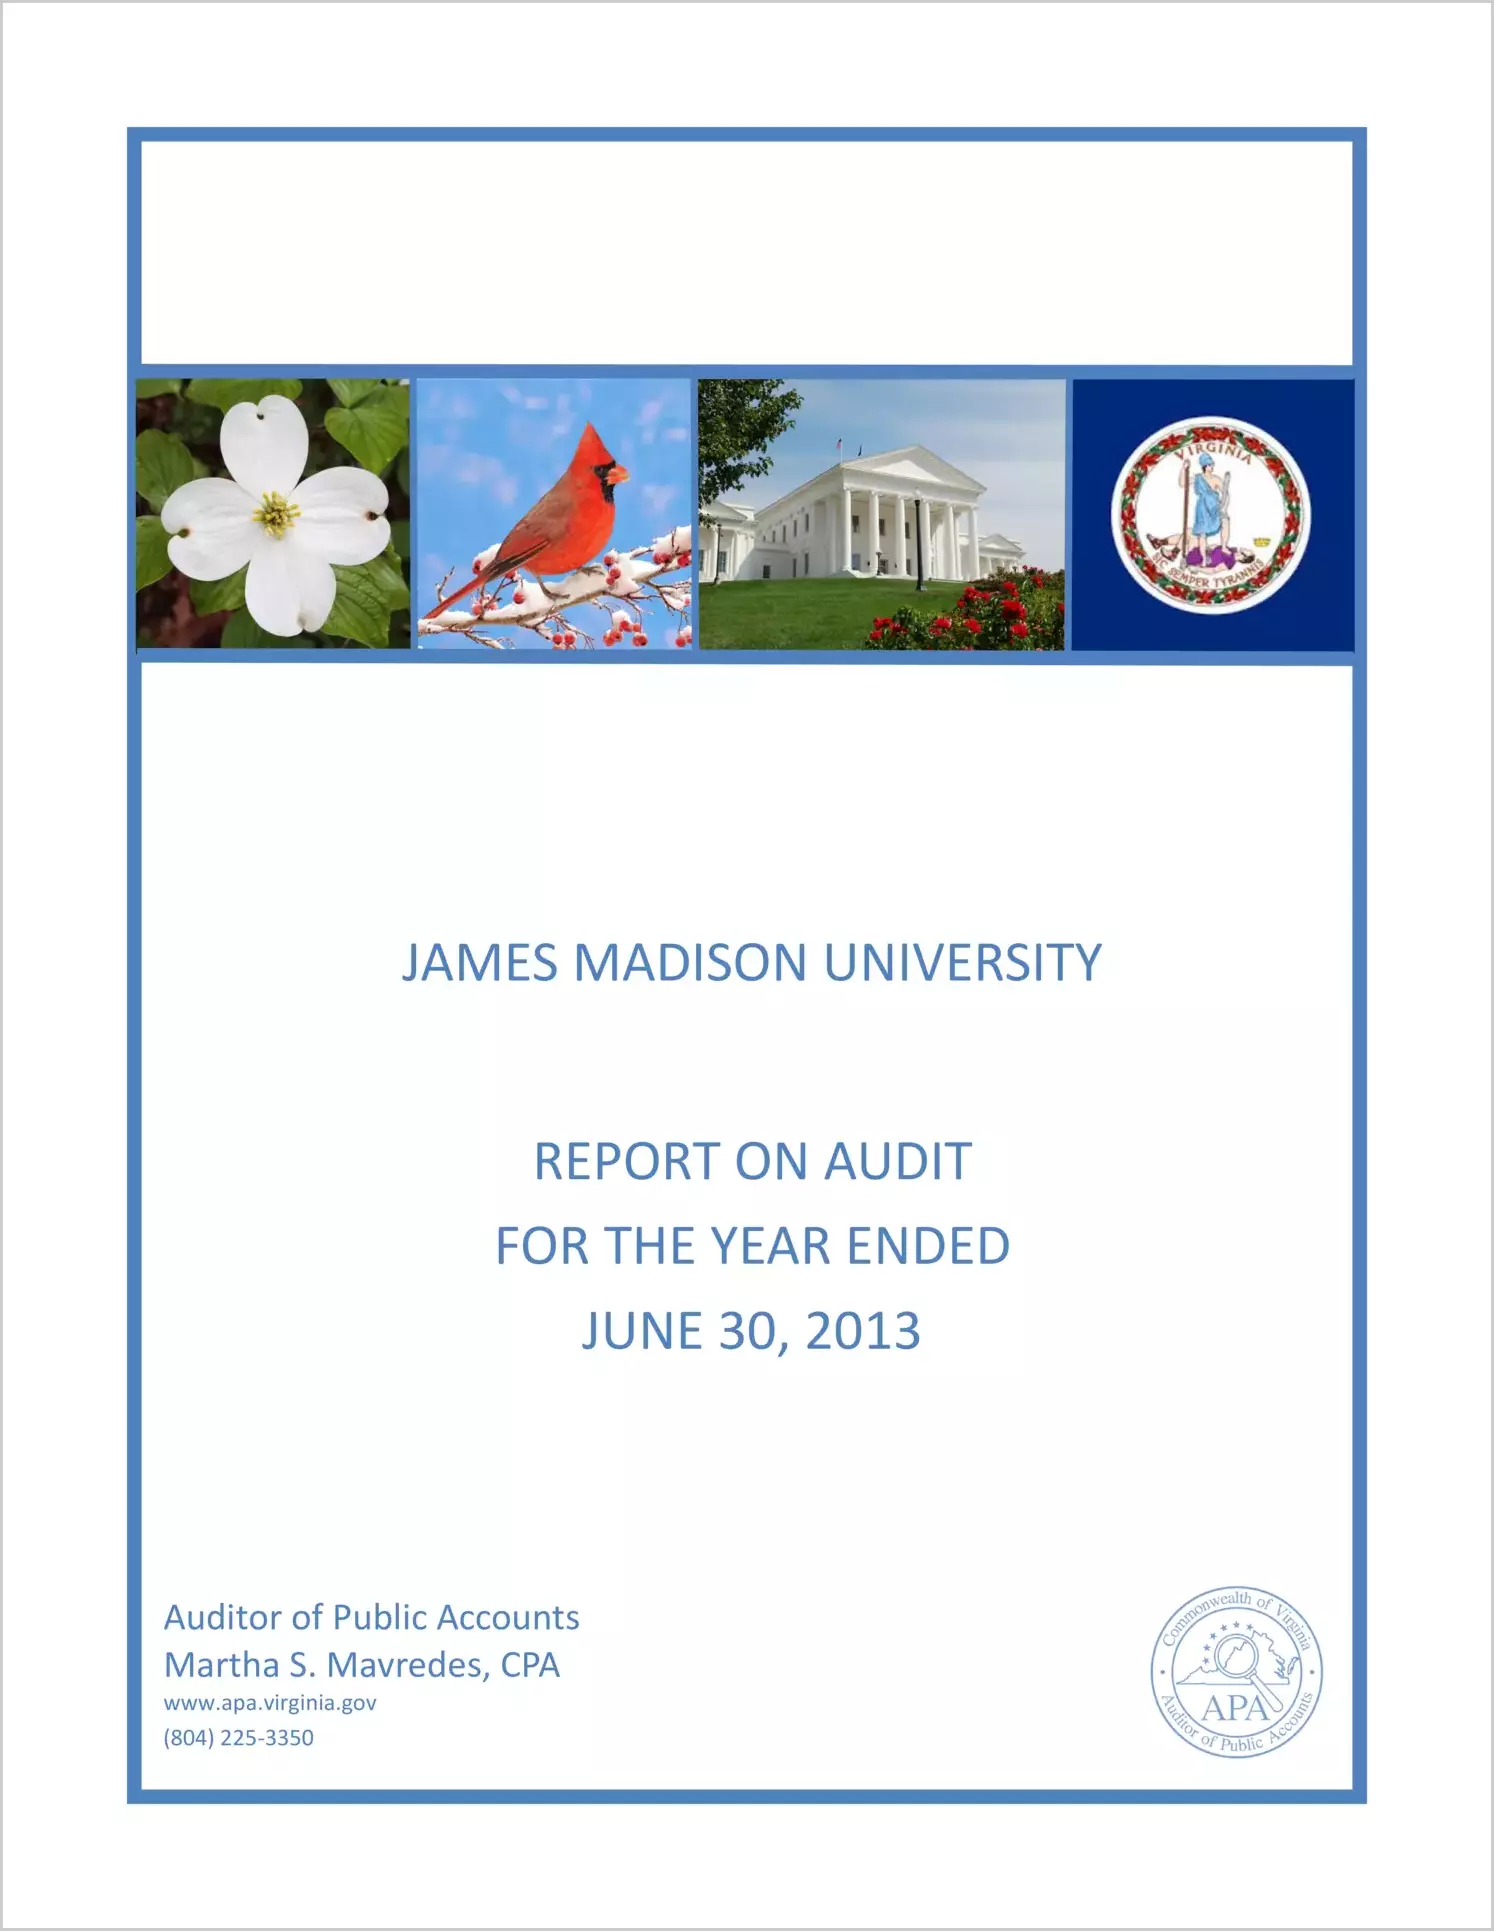 James Madison University for the year ended June 30, 2013